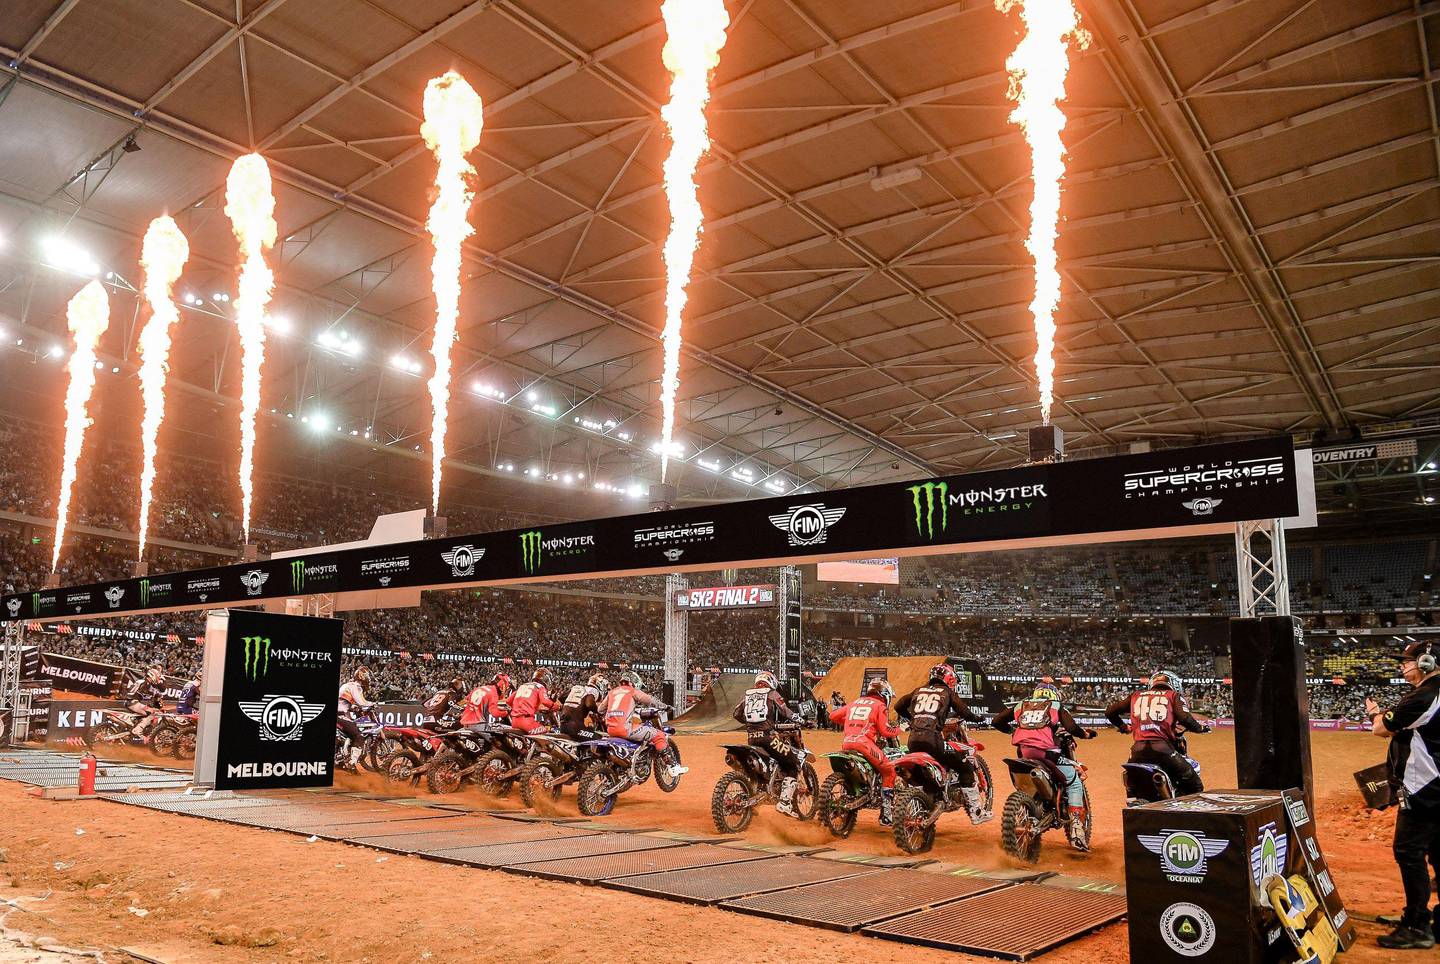 SX Global will stage, manage and promote the FIM Supercross World Championship this year. Photo: Mubadala Capital